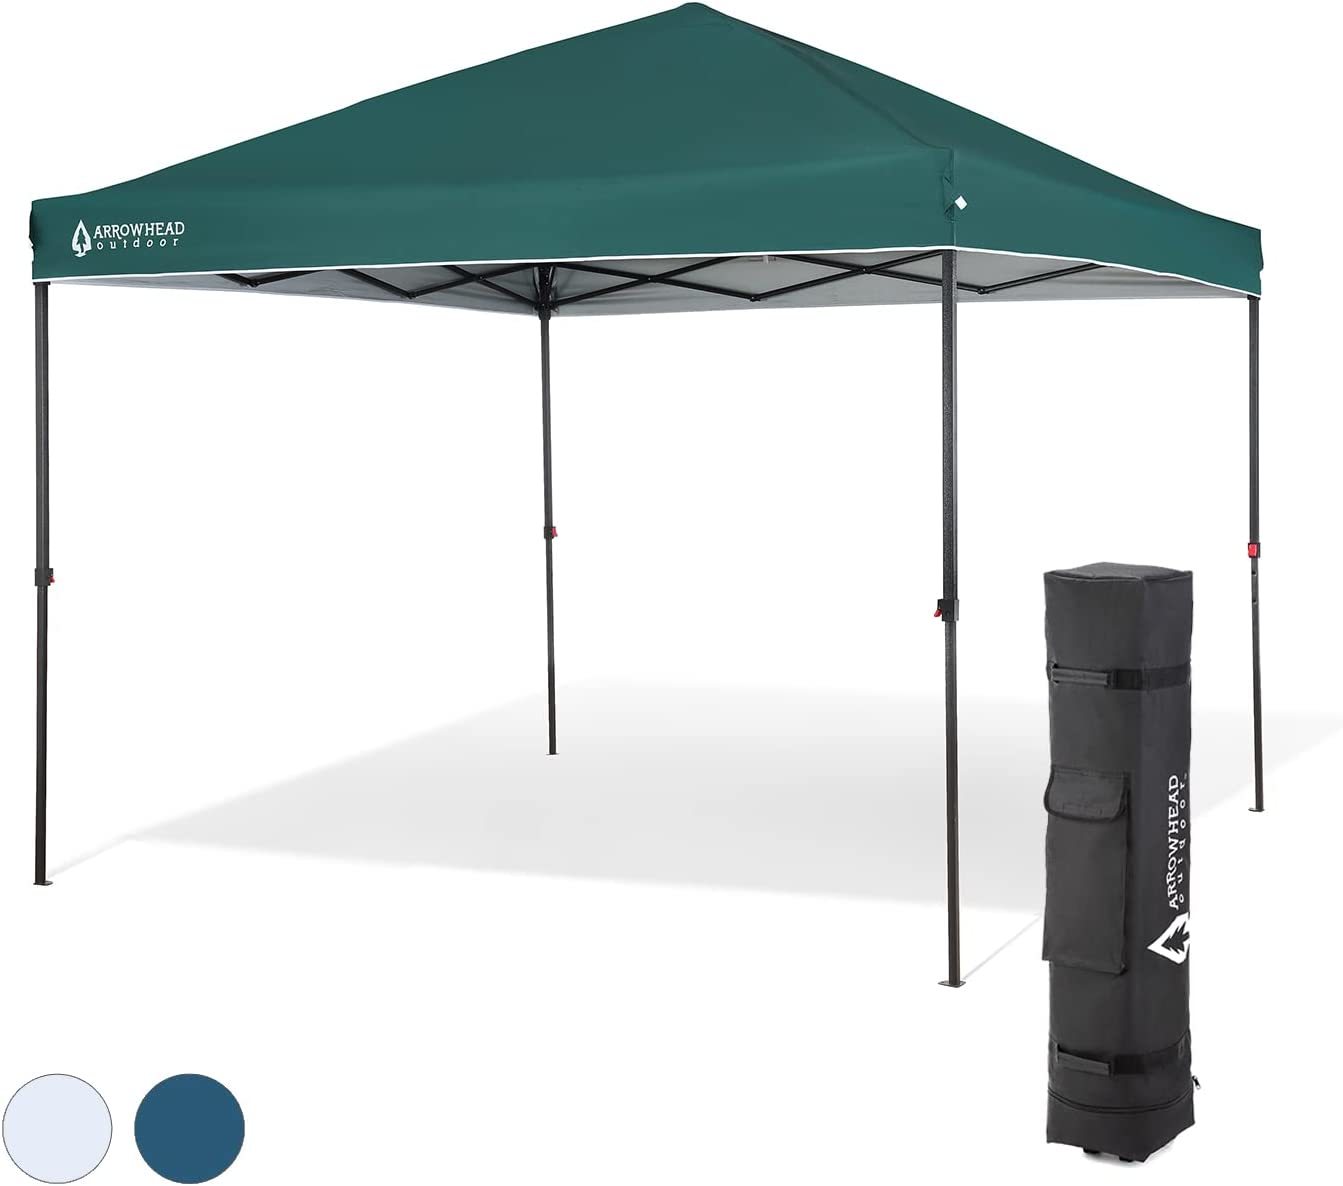 Arrowhead Outdoor 10x10 Pop-Up Canopy & Instant Shelter, Easy One Person Setup, Water & UV Resistant 150D Fabric Construction, Adjustable Height, Whee